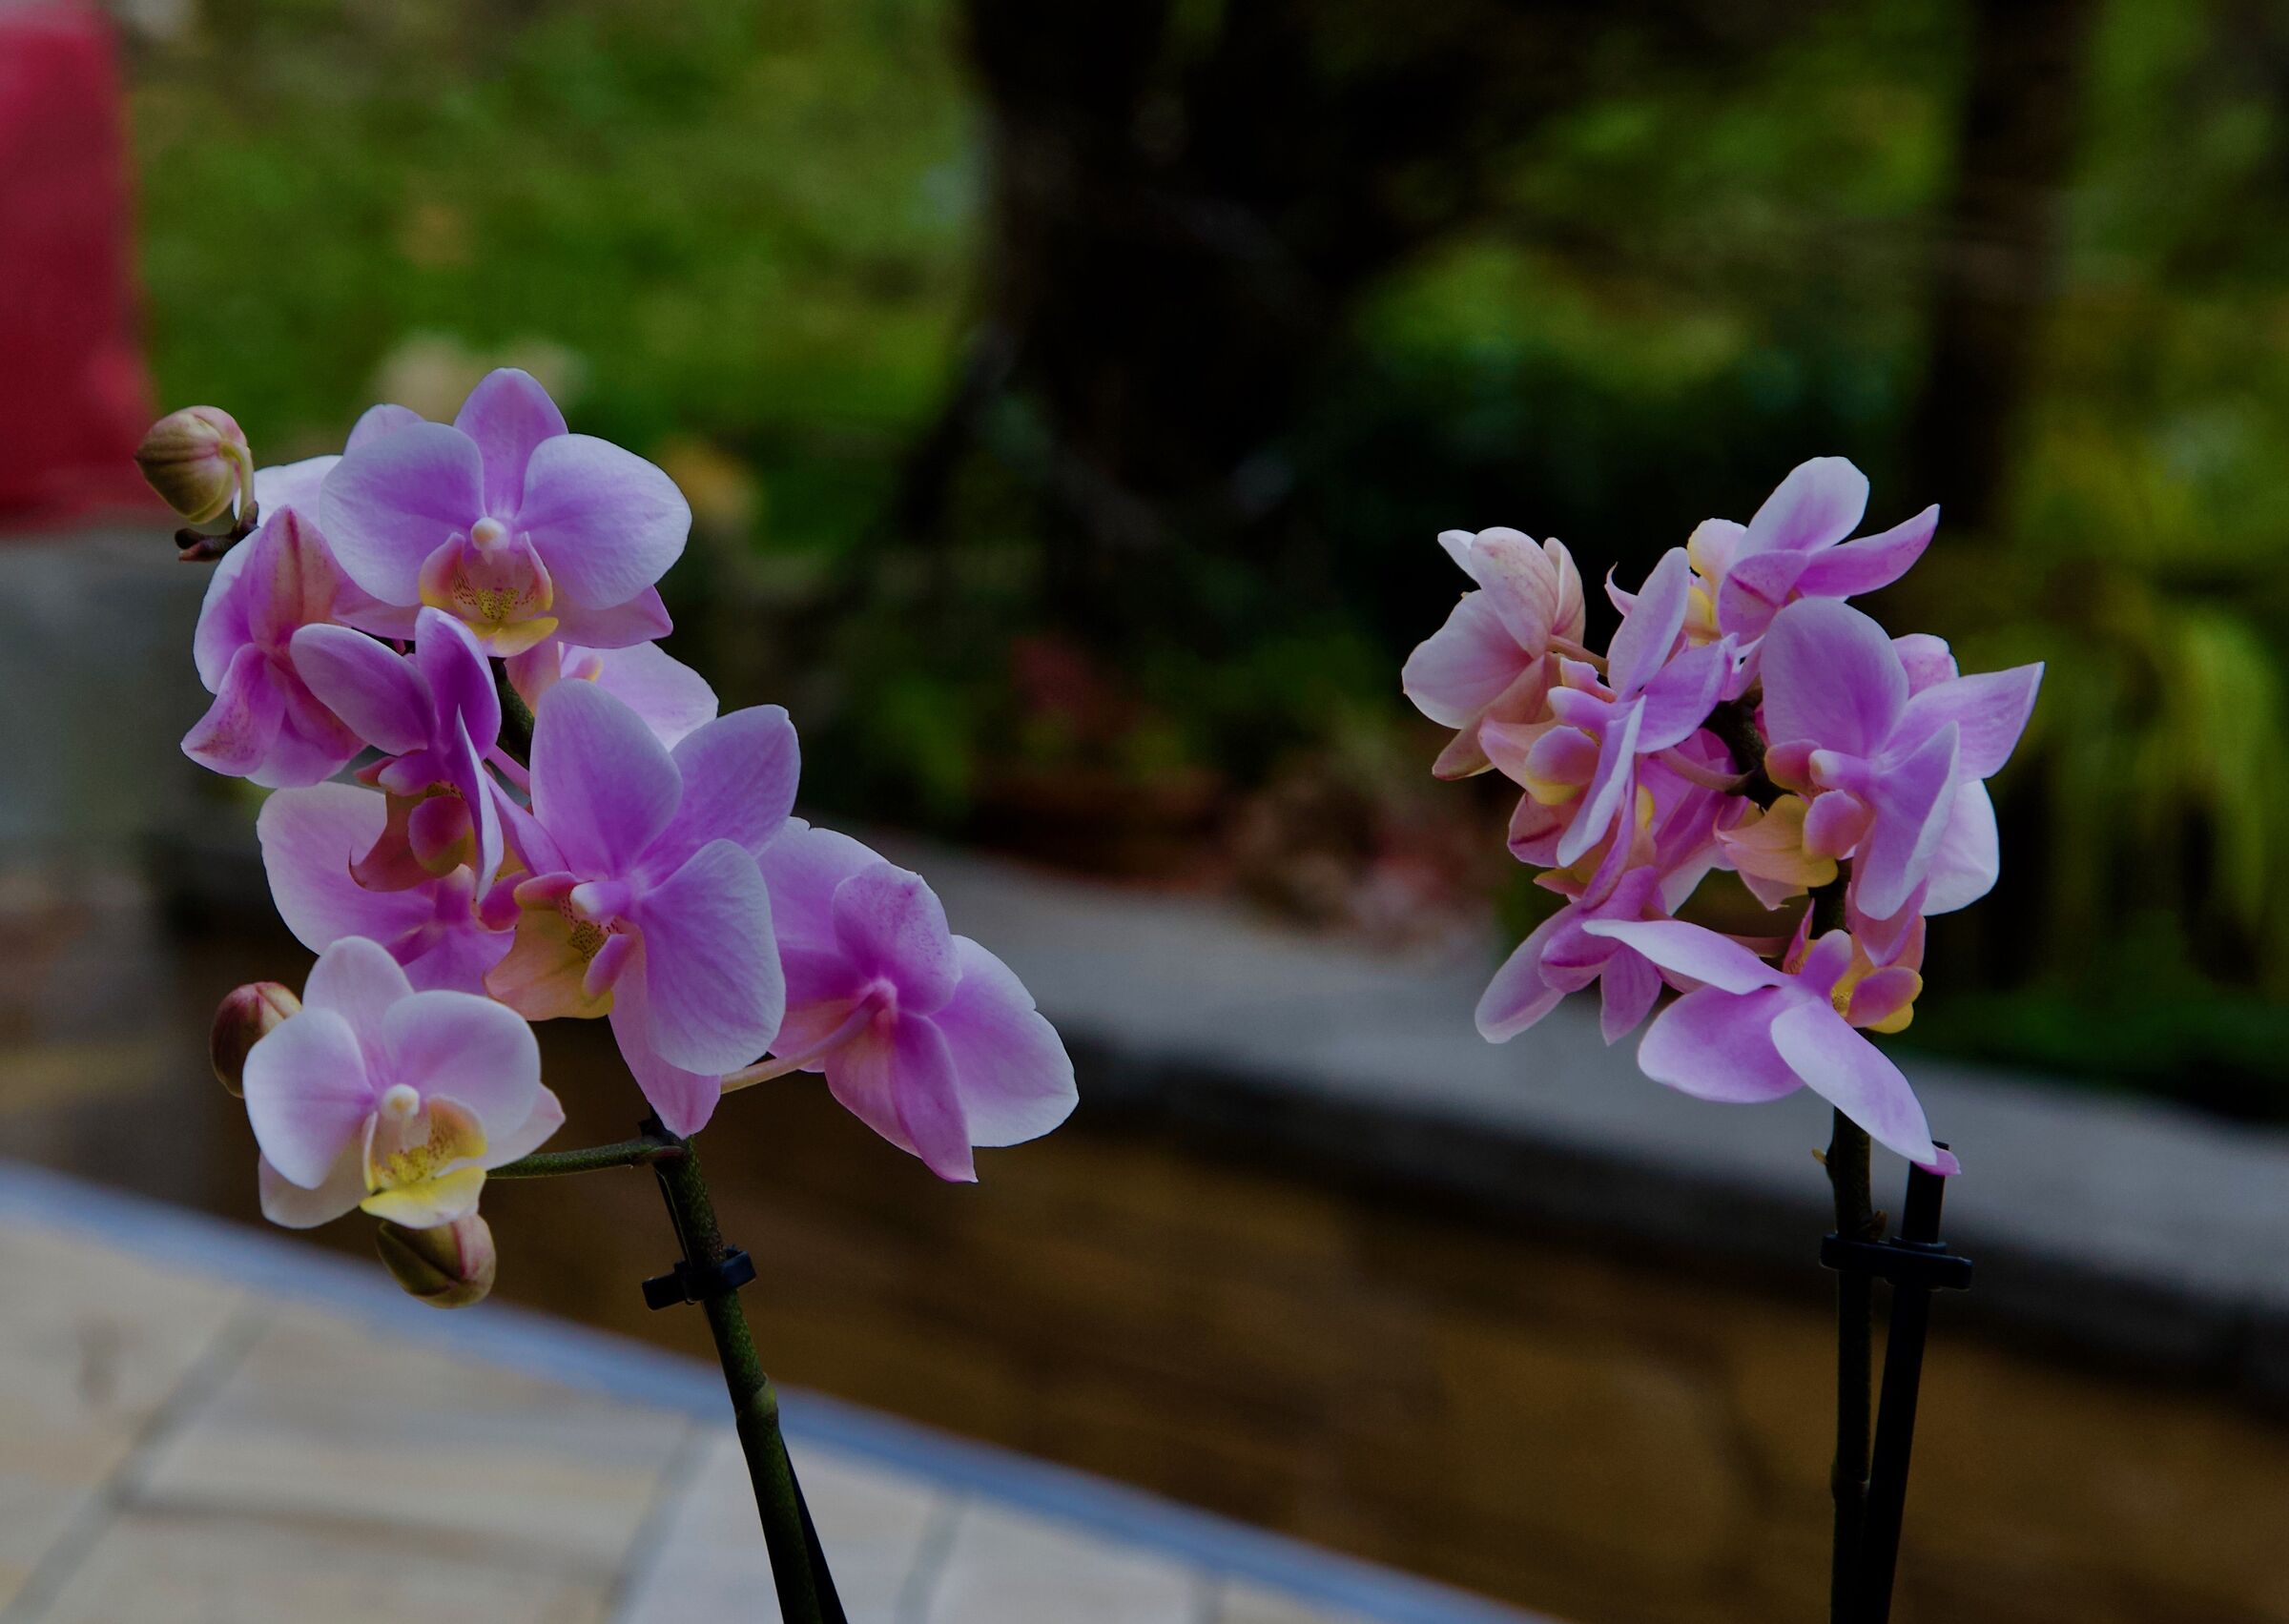 Chatting between orchids......